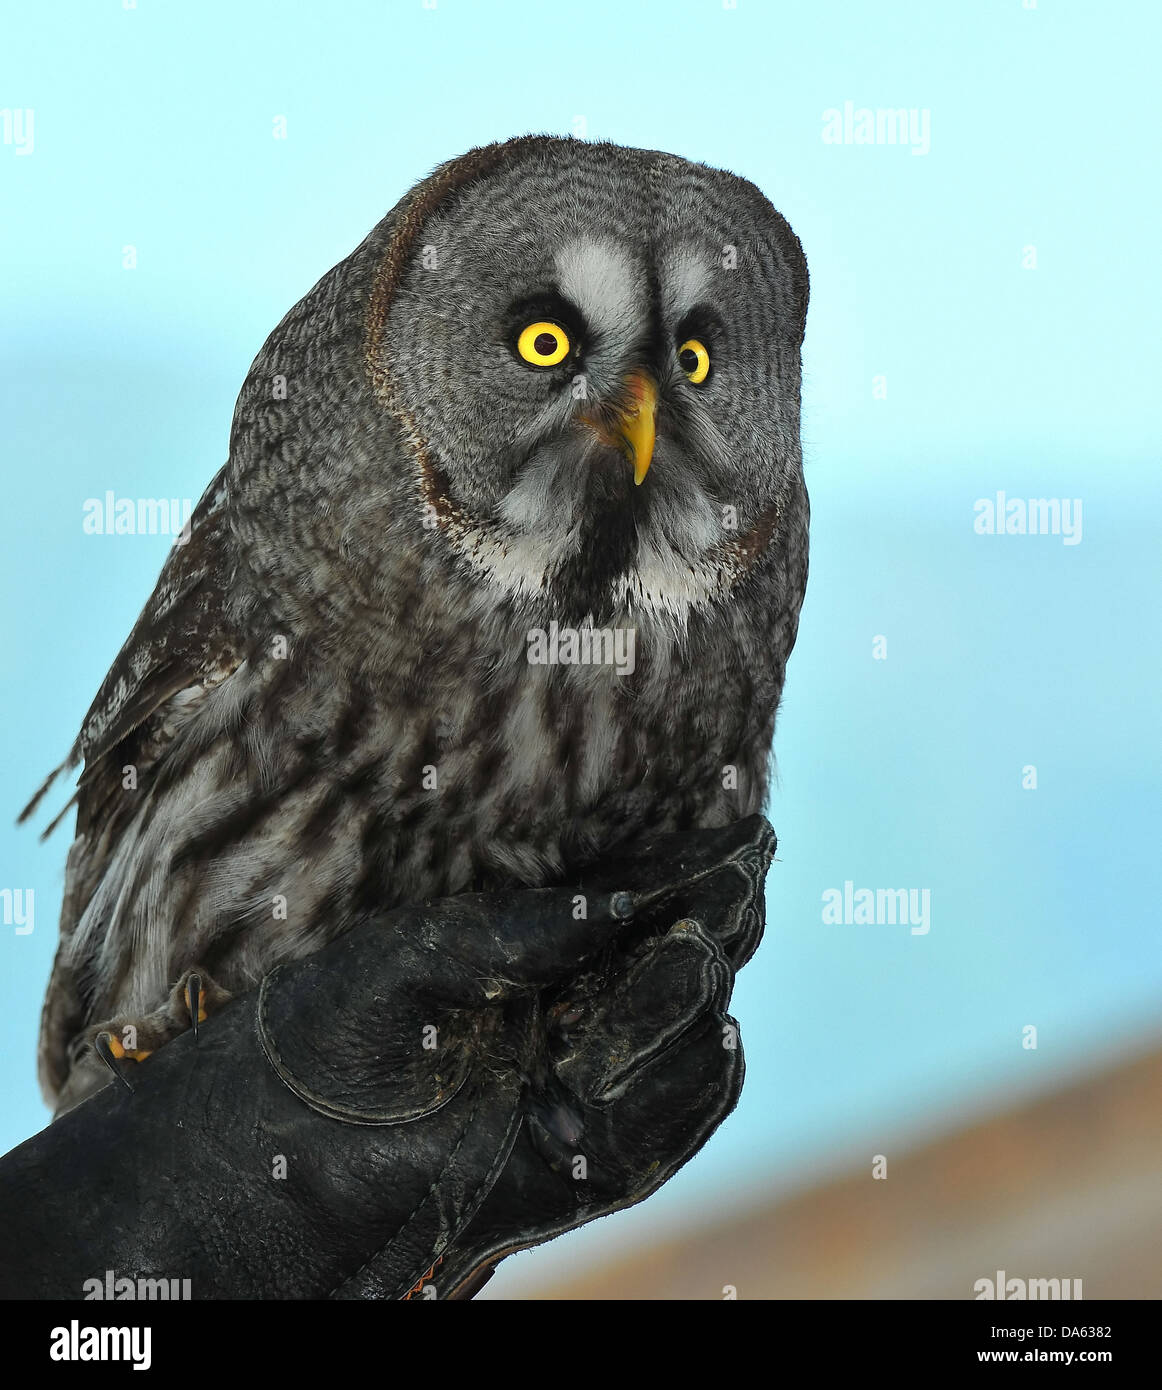 A great grey owl perched on  a falconers gauntlet Stock Photo